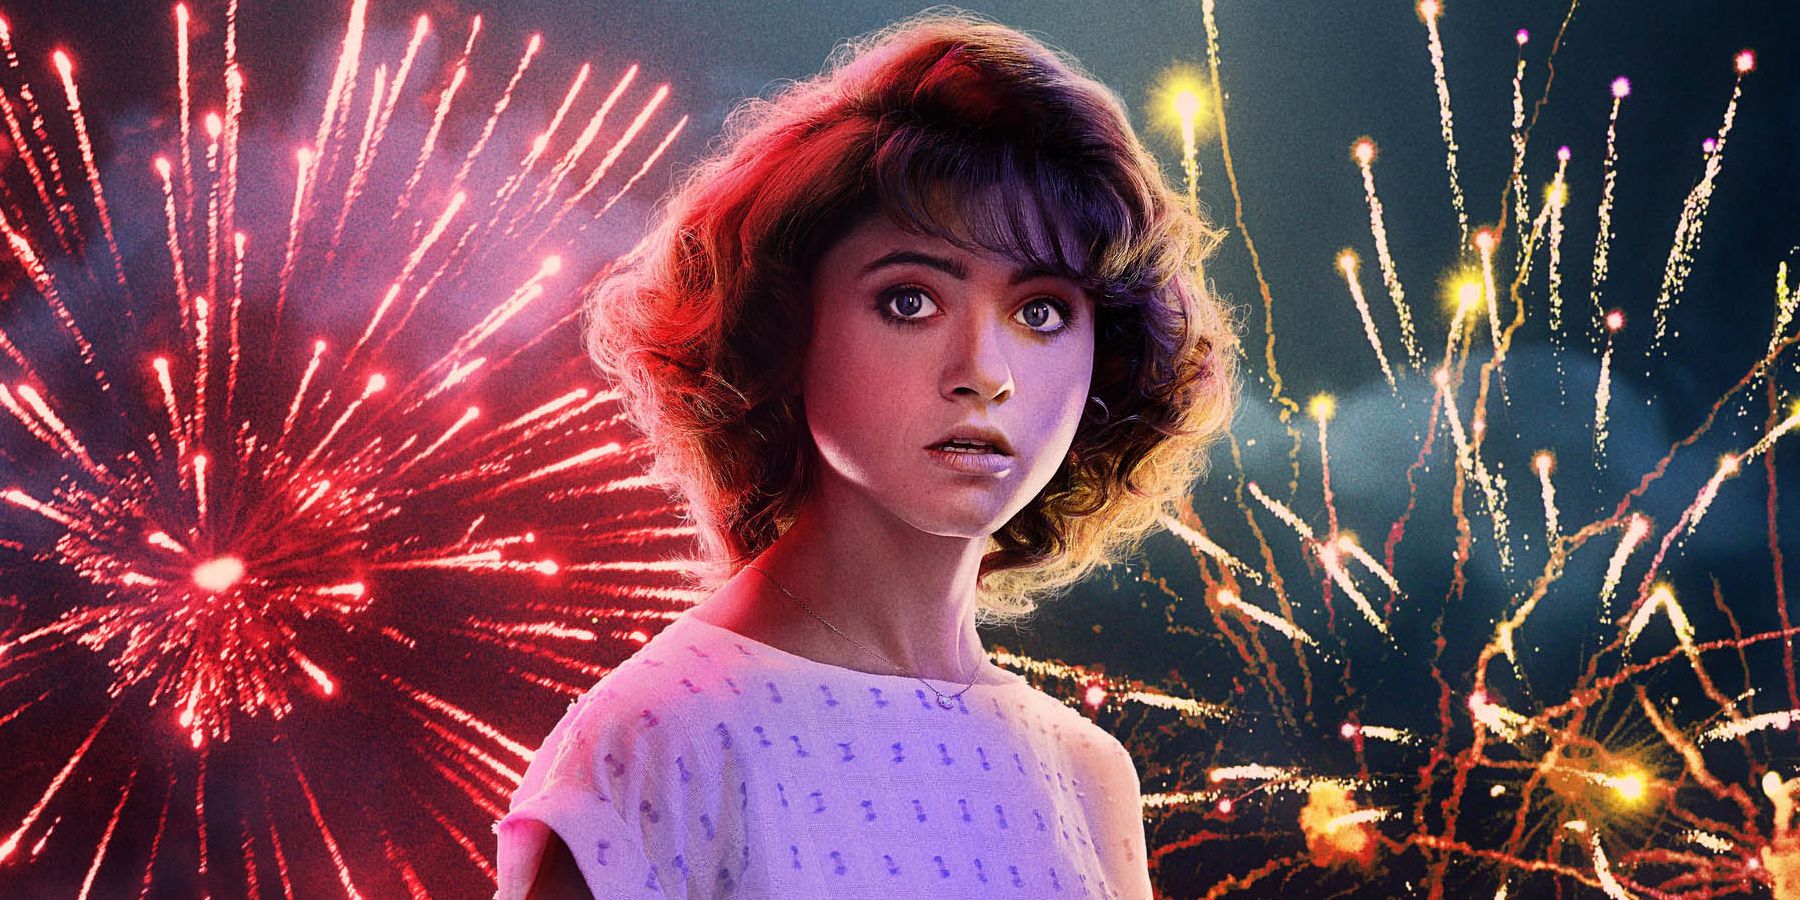 Stranger Things Season 4 Delay Is Fixing Repeated Production Issue